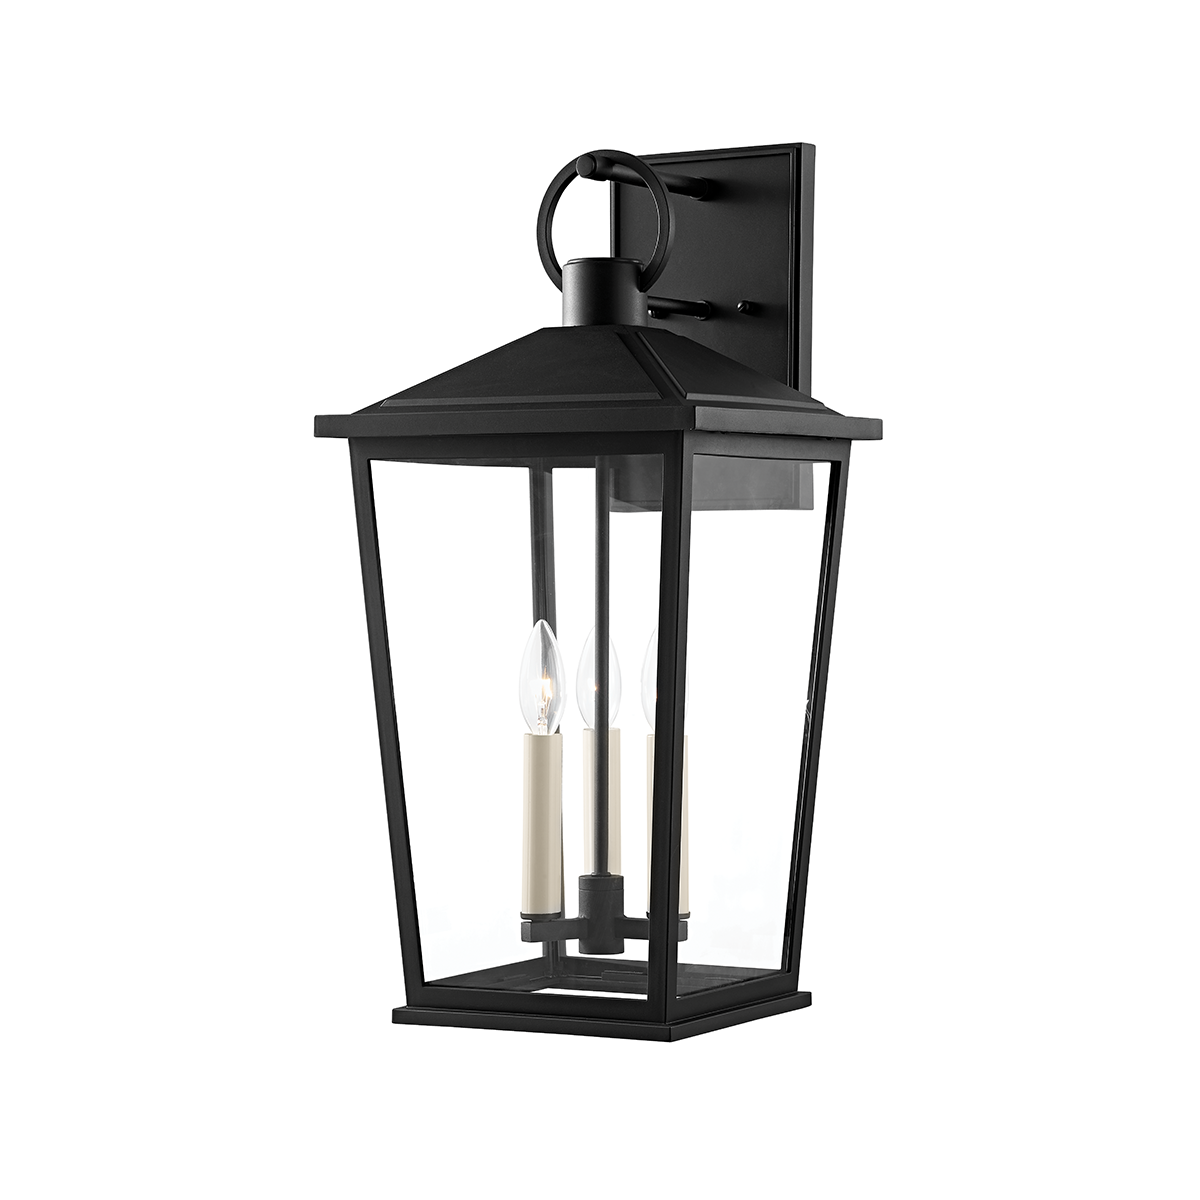 Troy Lighting 3 LIGHT LARGE EXTERIOR WALL SCONCE B8903 Outdoor l Wall Troy Lighting TEXTURE BLACK  